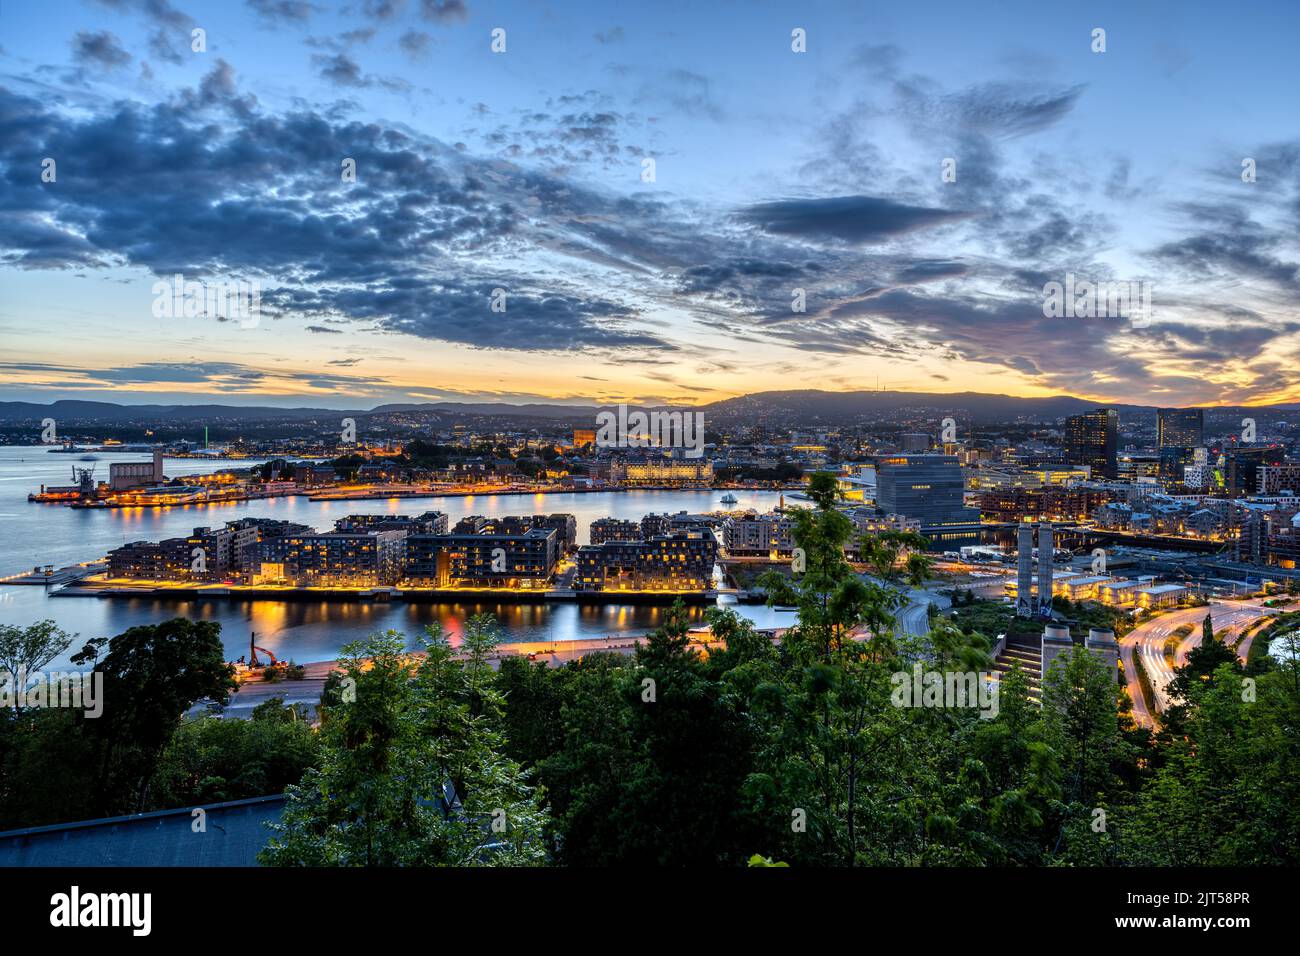 The lights of Oslo in Norway after sunset Stock Photo